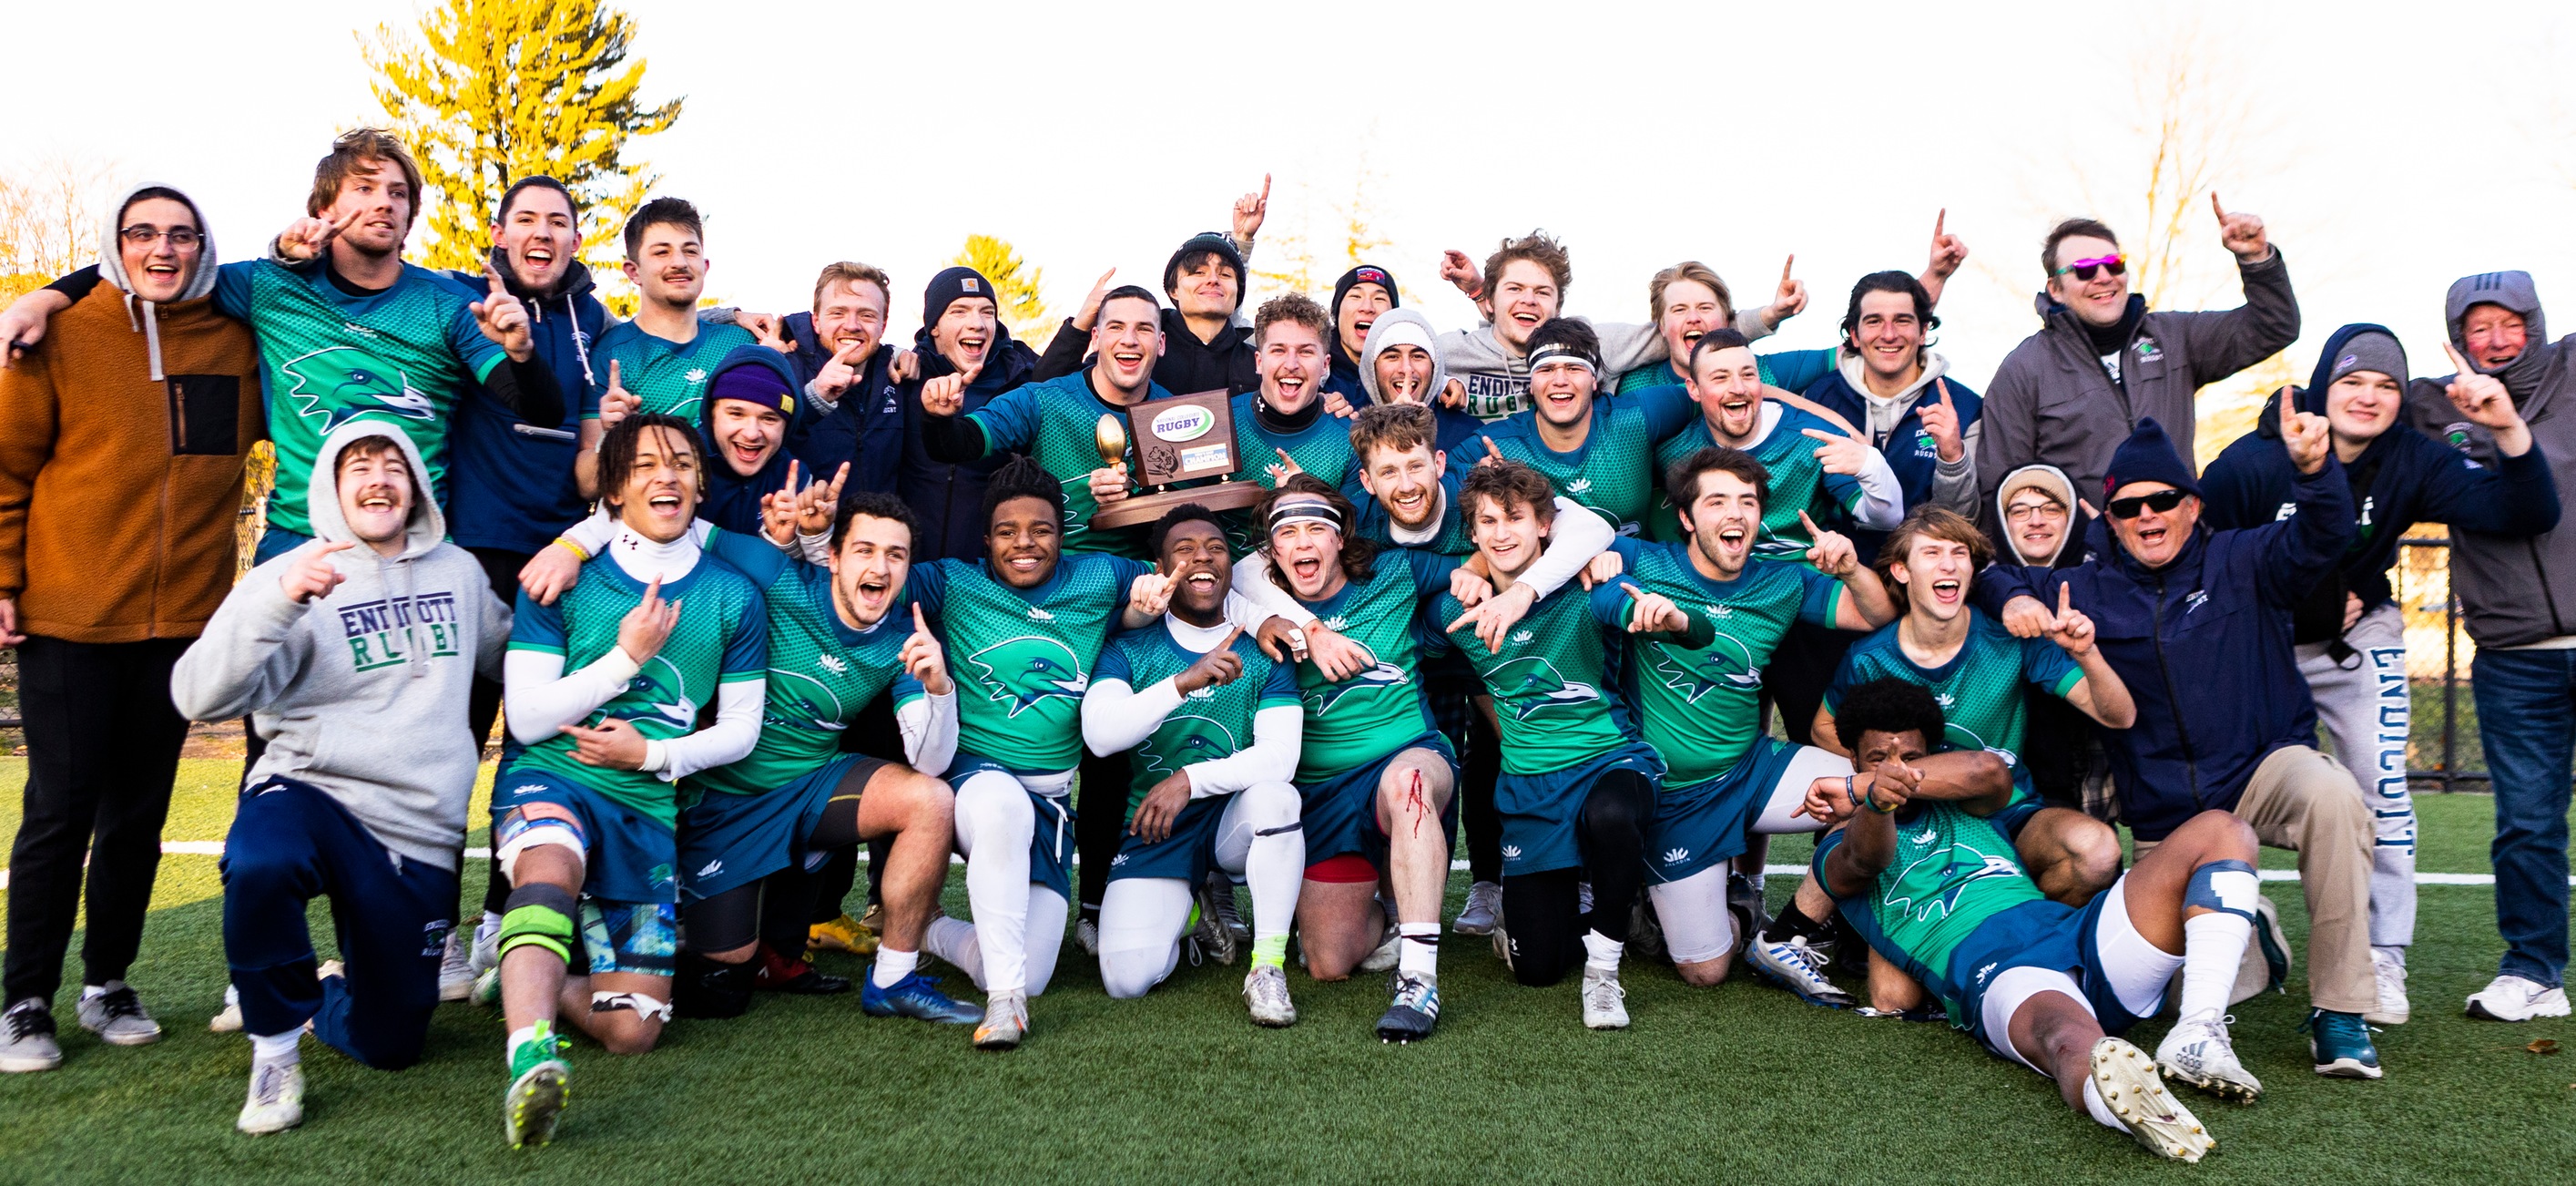 NCR REGIONAL CHAMPS! Lynch Buries Walk-Off Penalty Kick, Gulls Edge UMaine 15-13 In Instant Classic